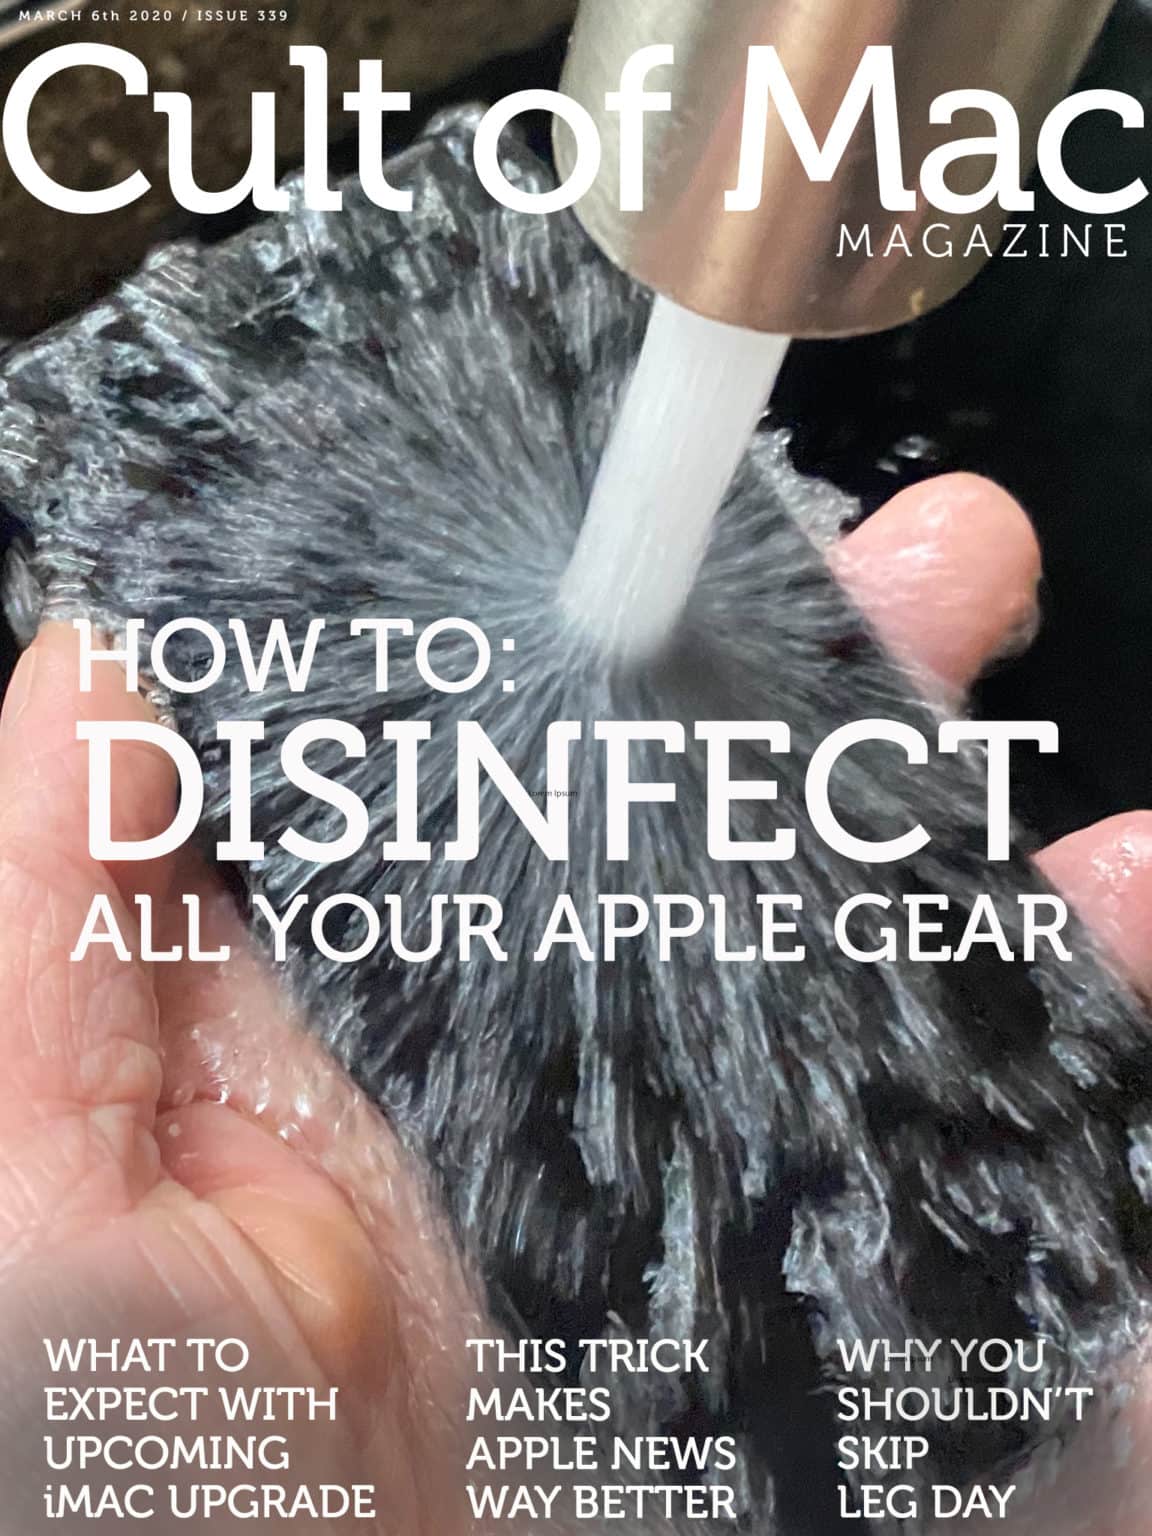 Keep it clean! How to disinfect your iPhone and other Apple gear amid COVID-19 outbreak.